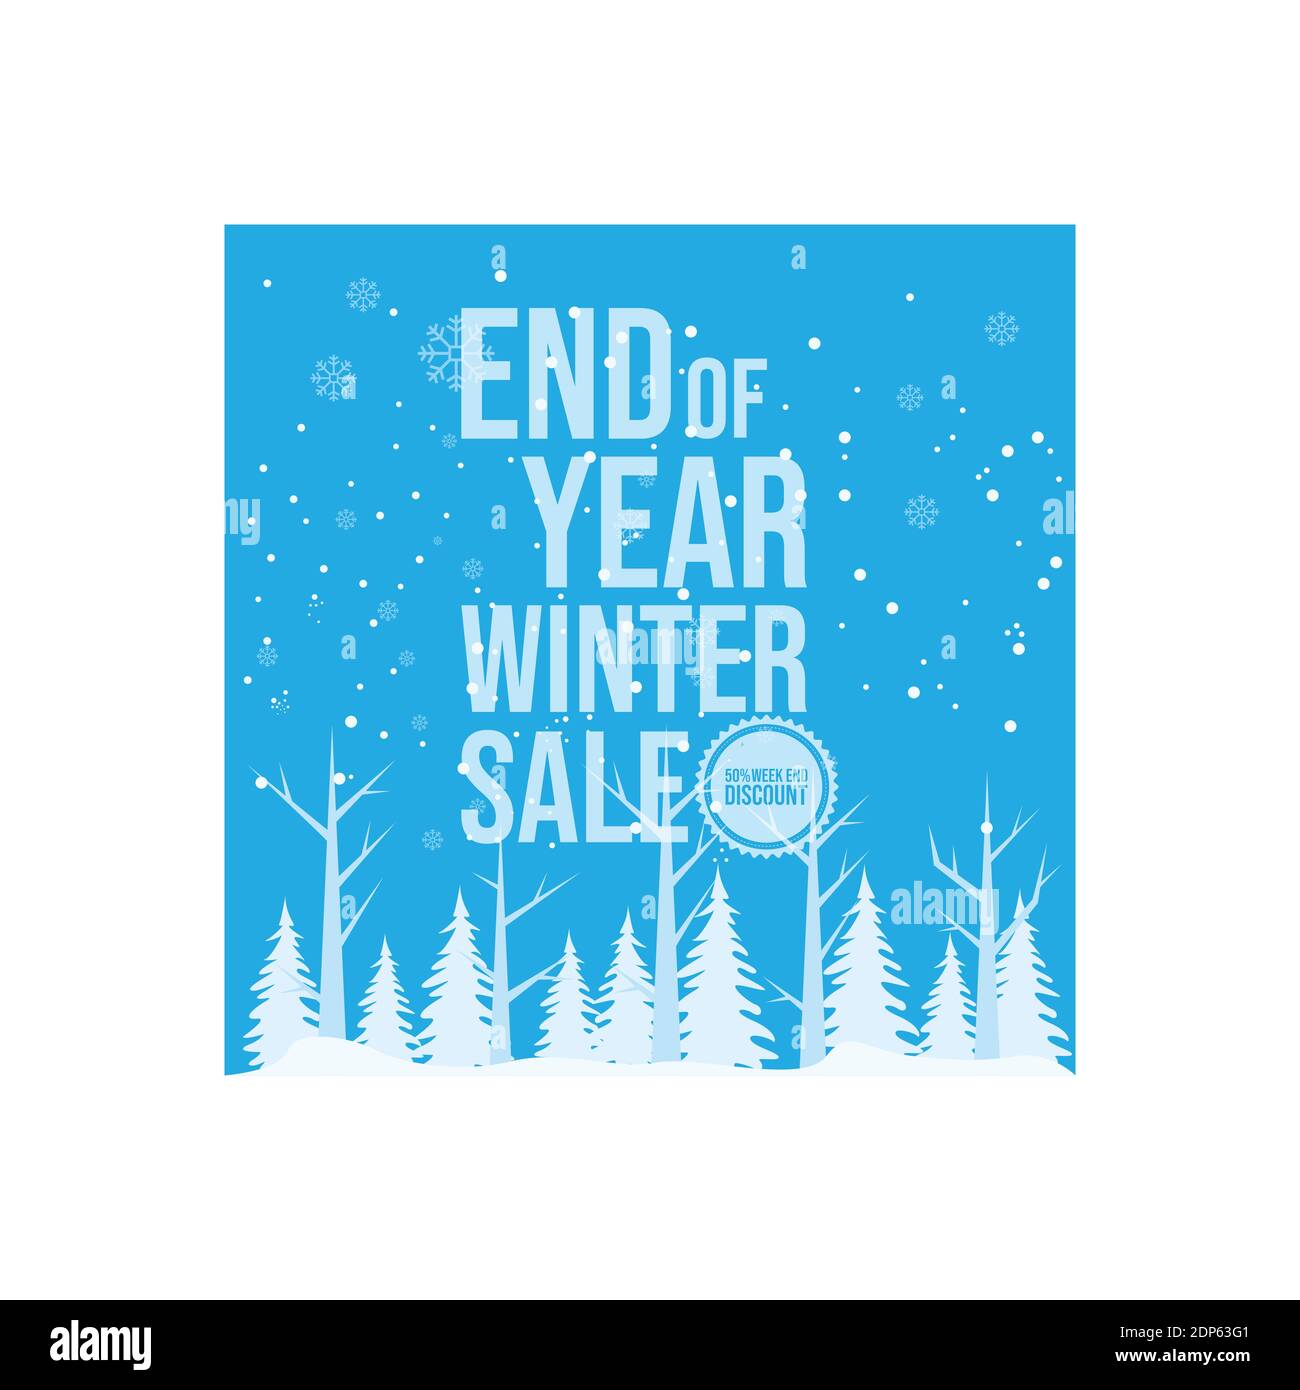 End of year winter sale banner template design. snowflake element on white snow background for year end promotion. Vector illustration Stock Vector